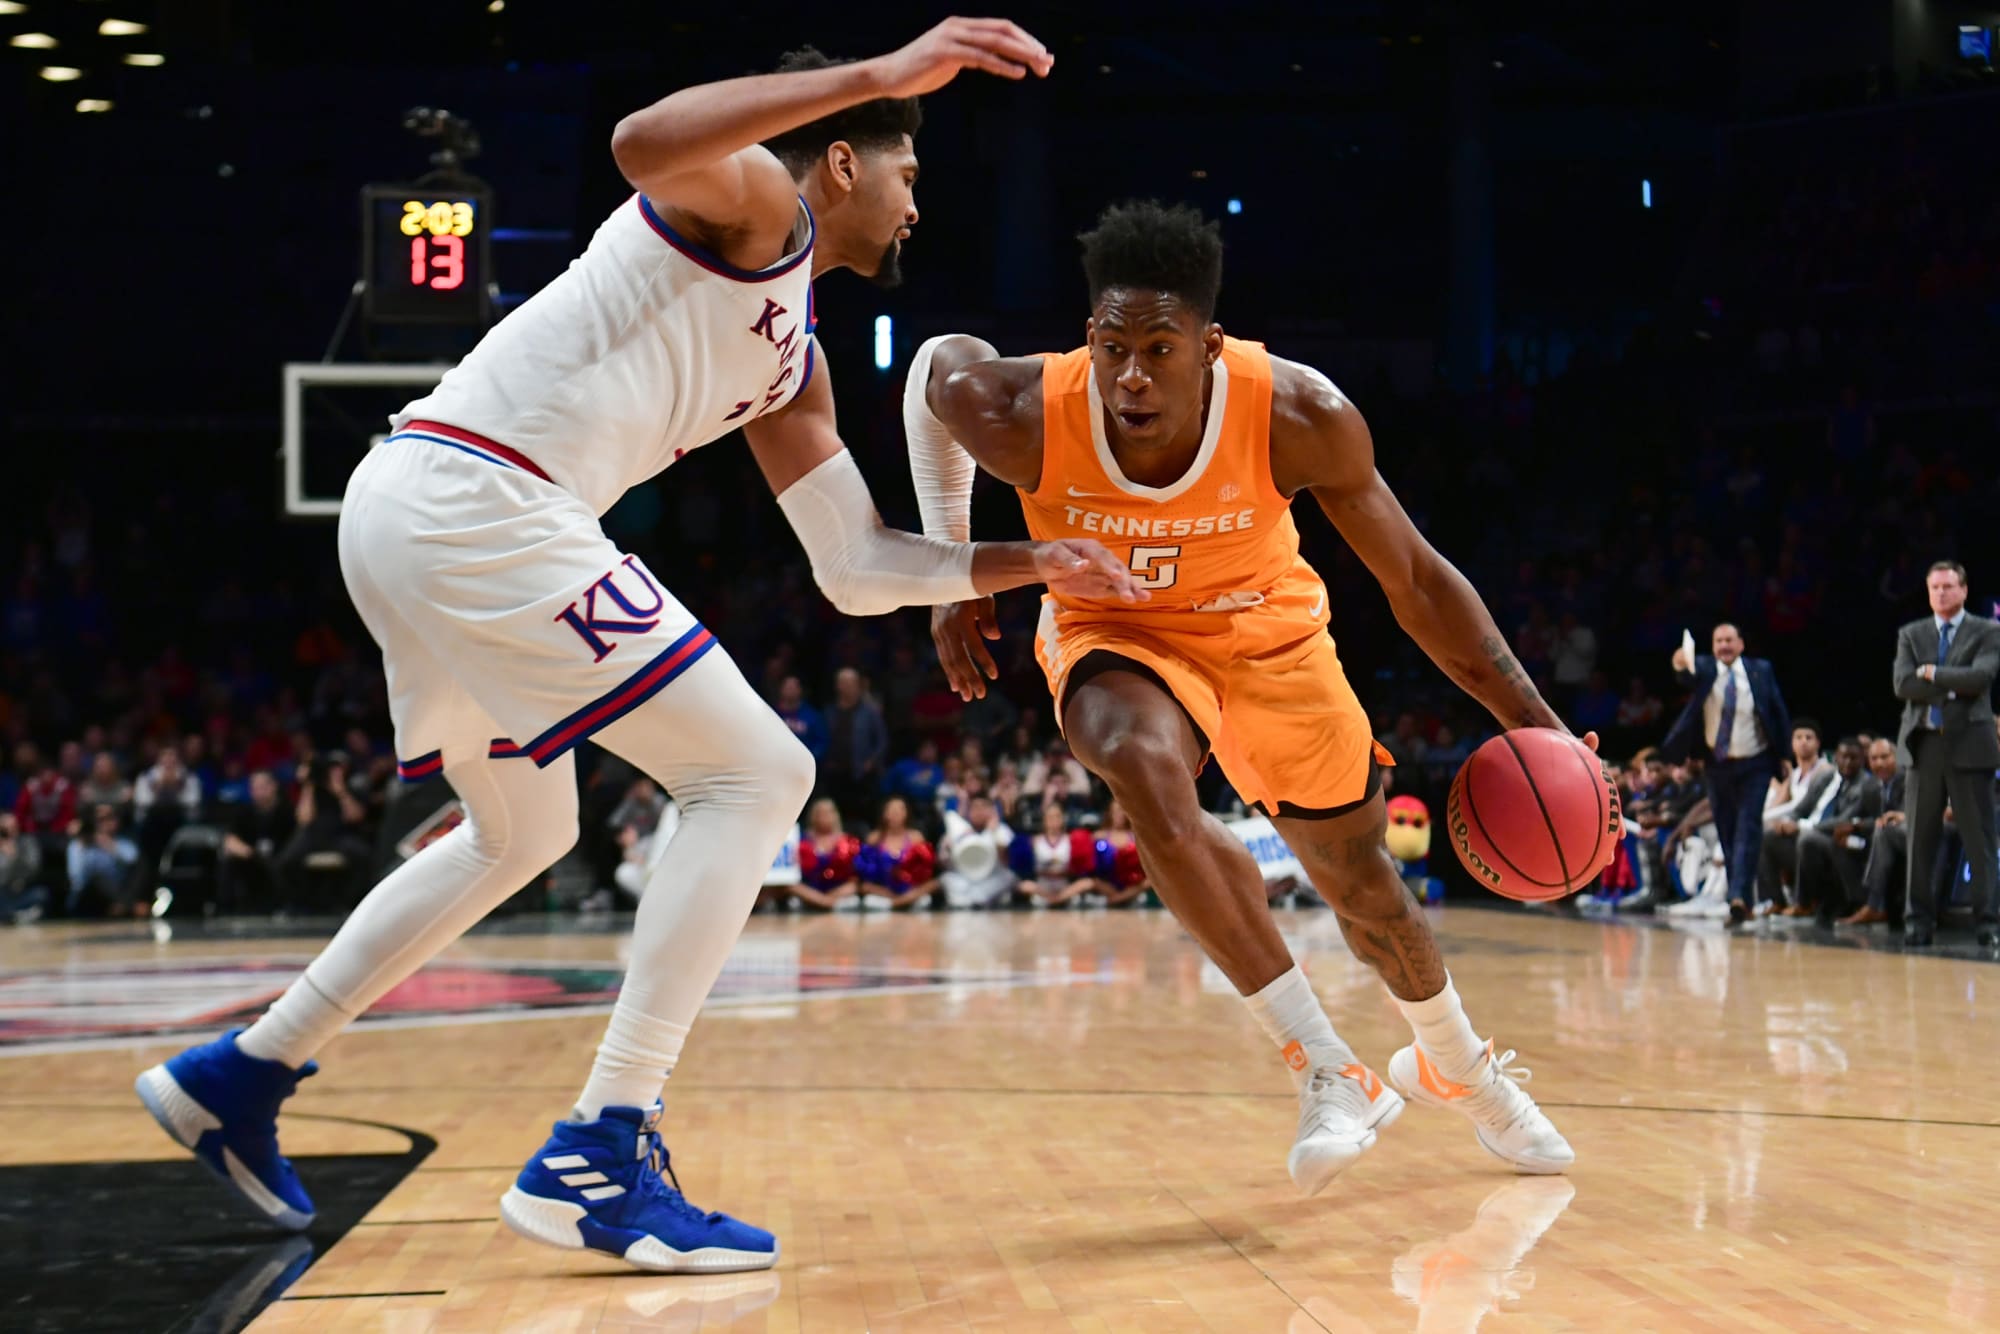 Kansas basketball vs. Tennessee Game time, odds, TV channel, and more